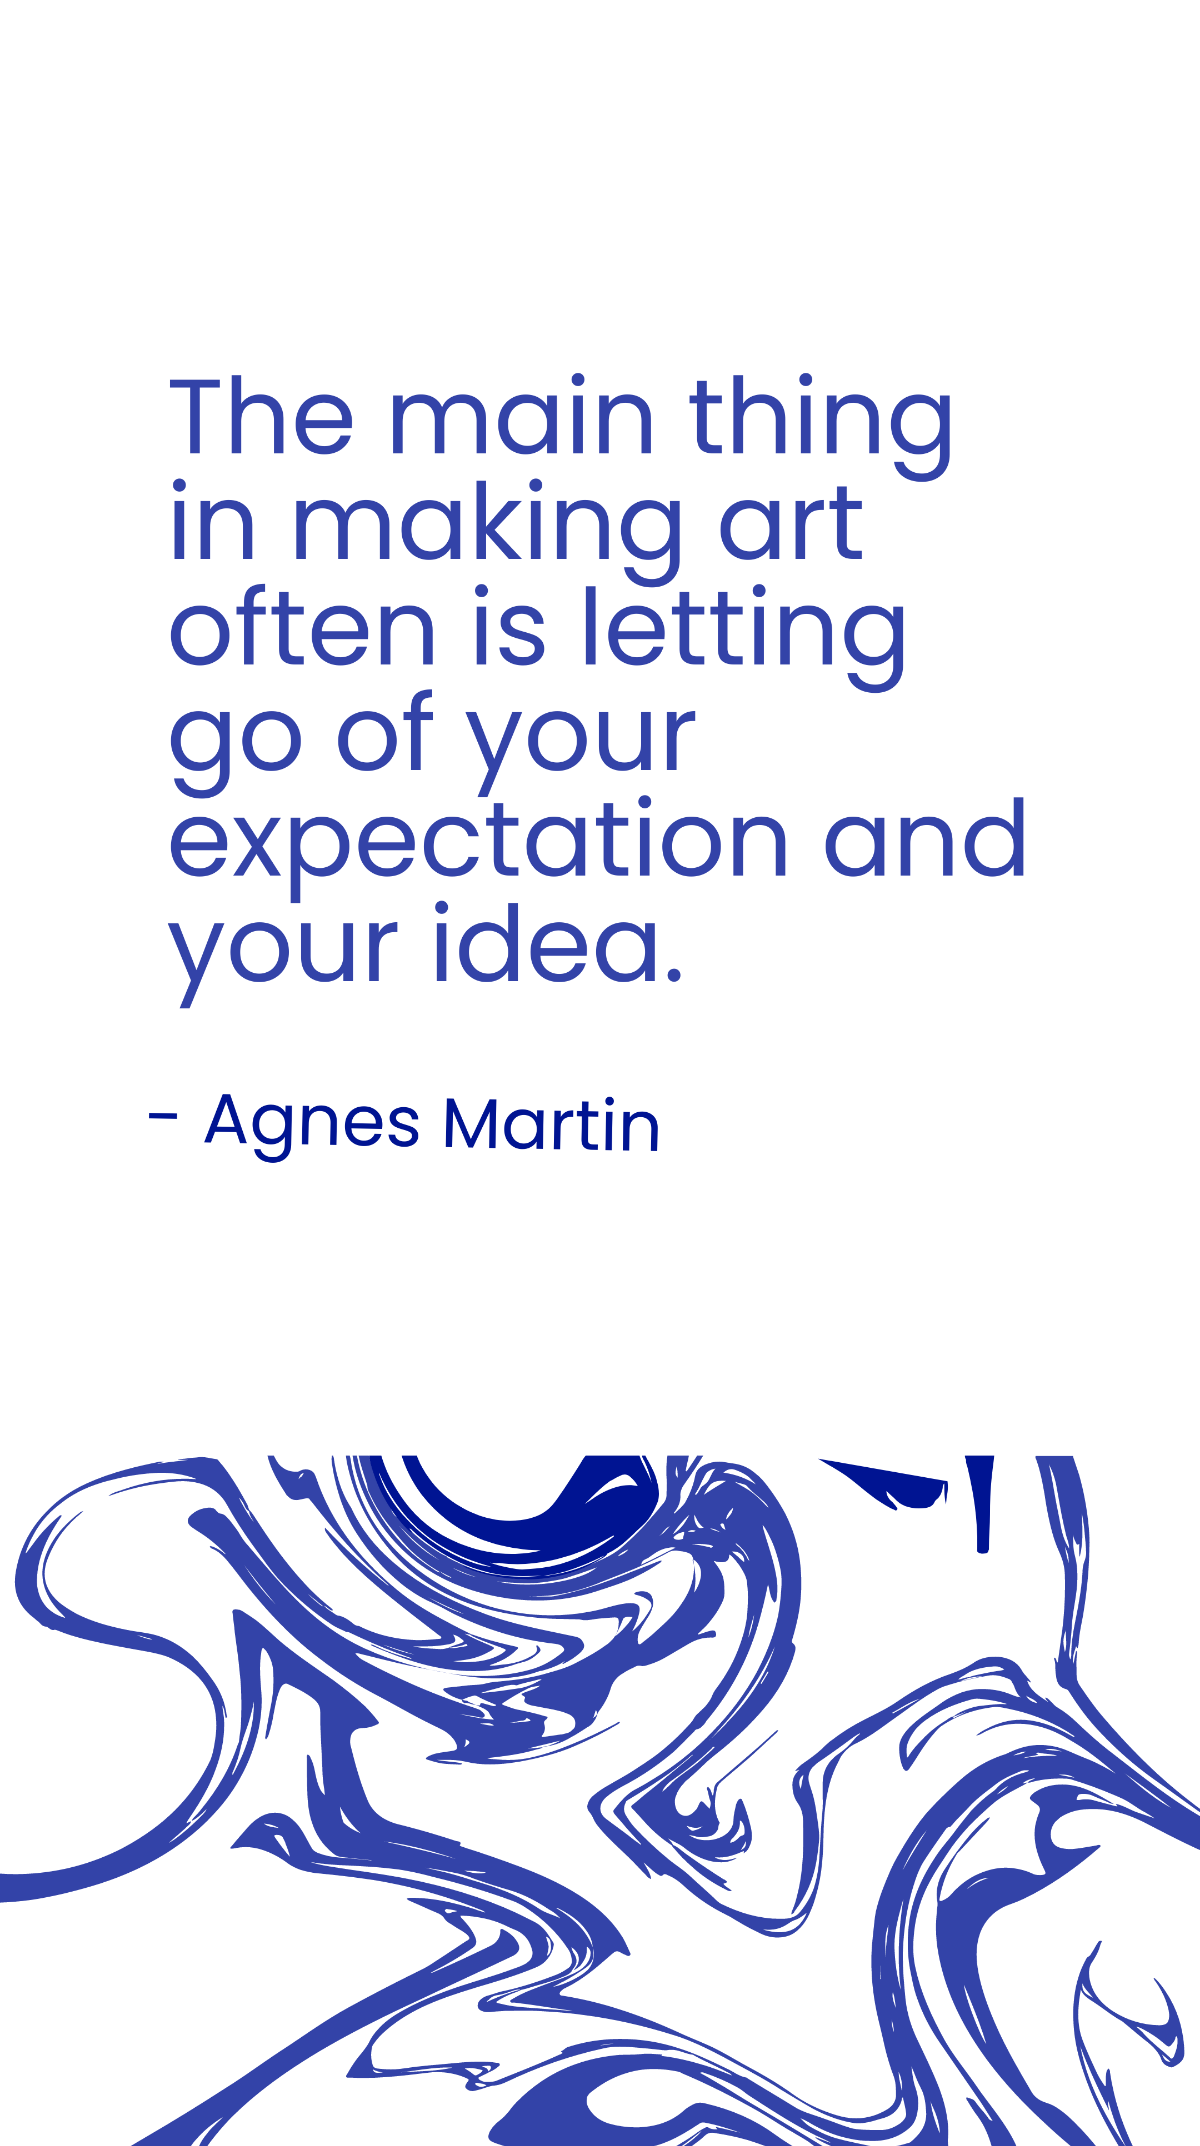 Agnes Martin - The main thing in making art often is letting go of your expectation and your idea.